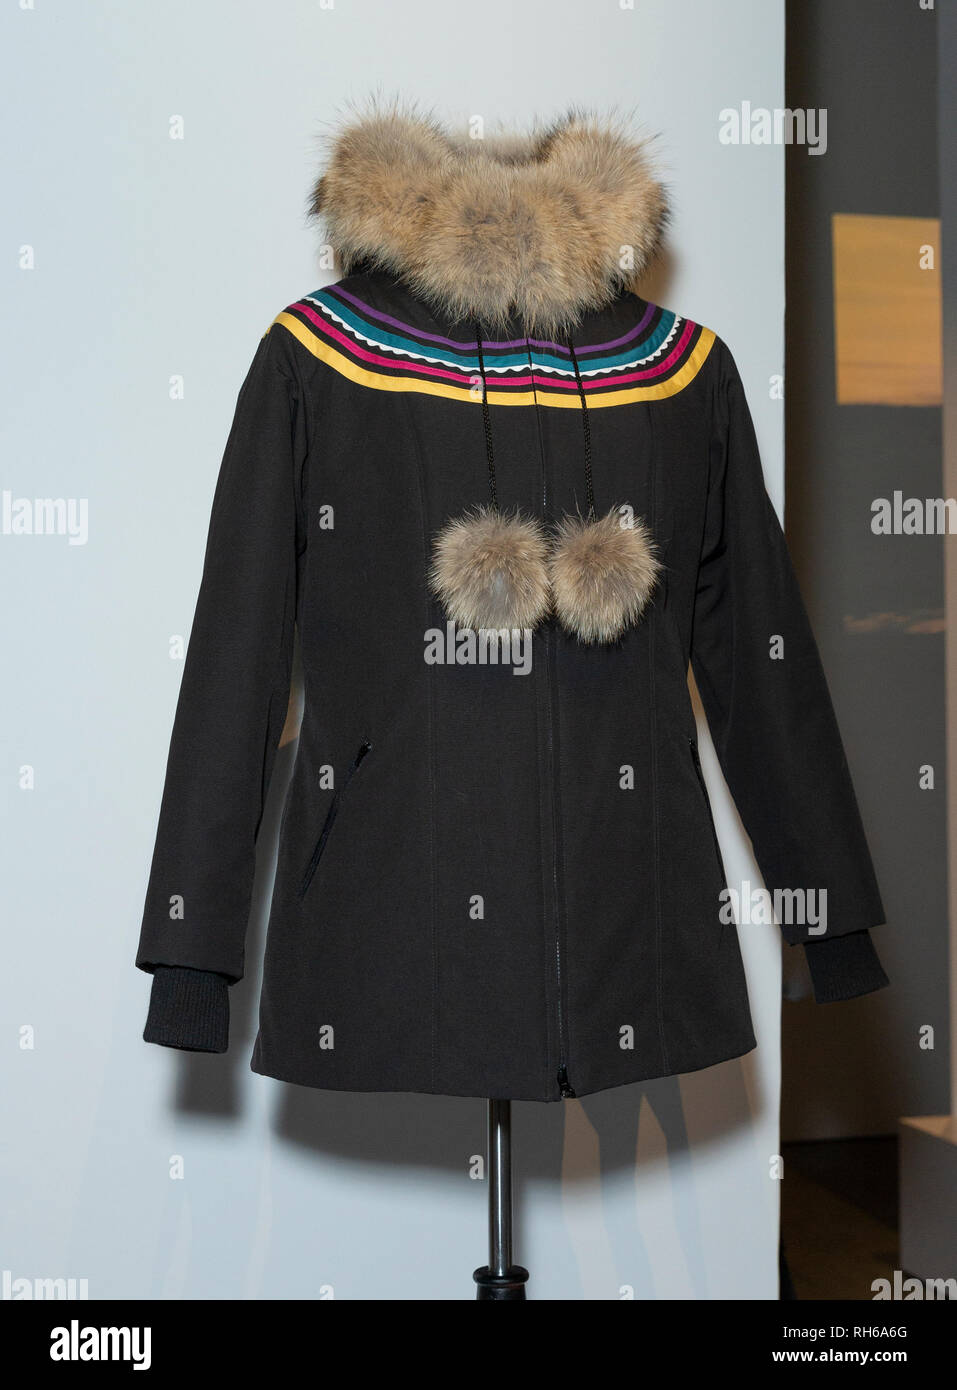 New York, NY - January 31, 2019: Parka made by Inuit seamstress on display  during Canada Goose Celebrates the Launch of Project Atigi at Studio 525  Credit: lev radin/Alamy Live News Stock Photo - Alamy